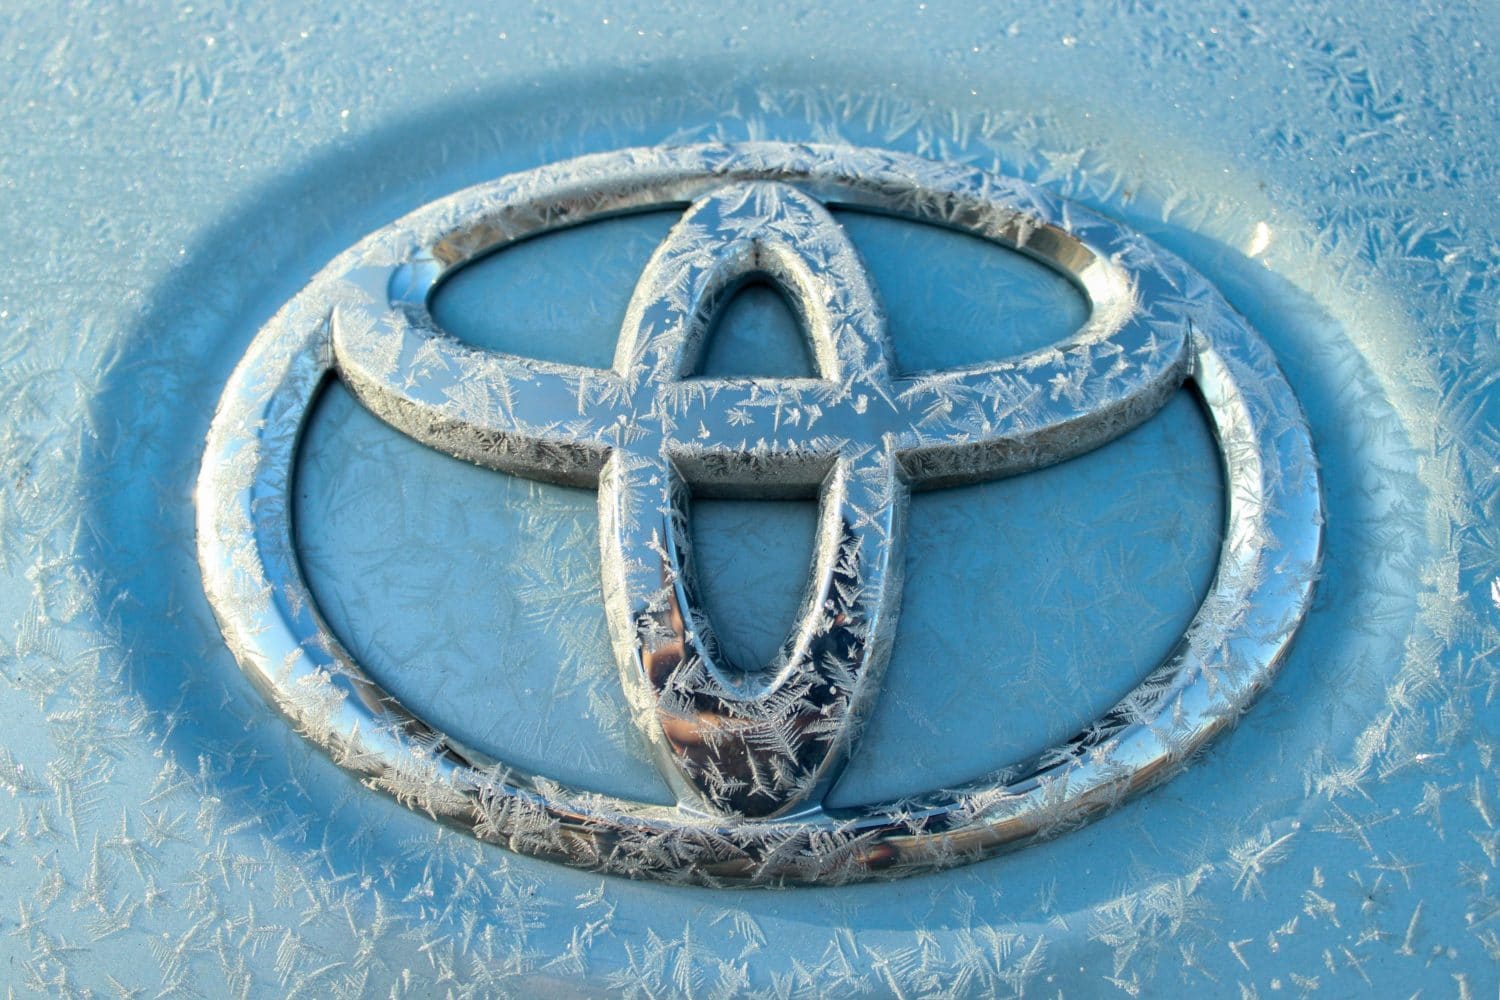 Le Toyota Way